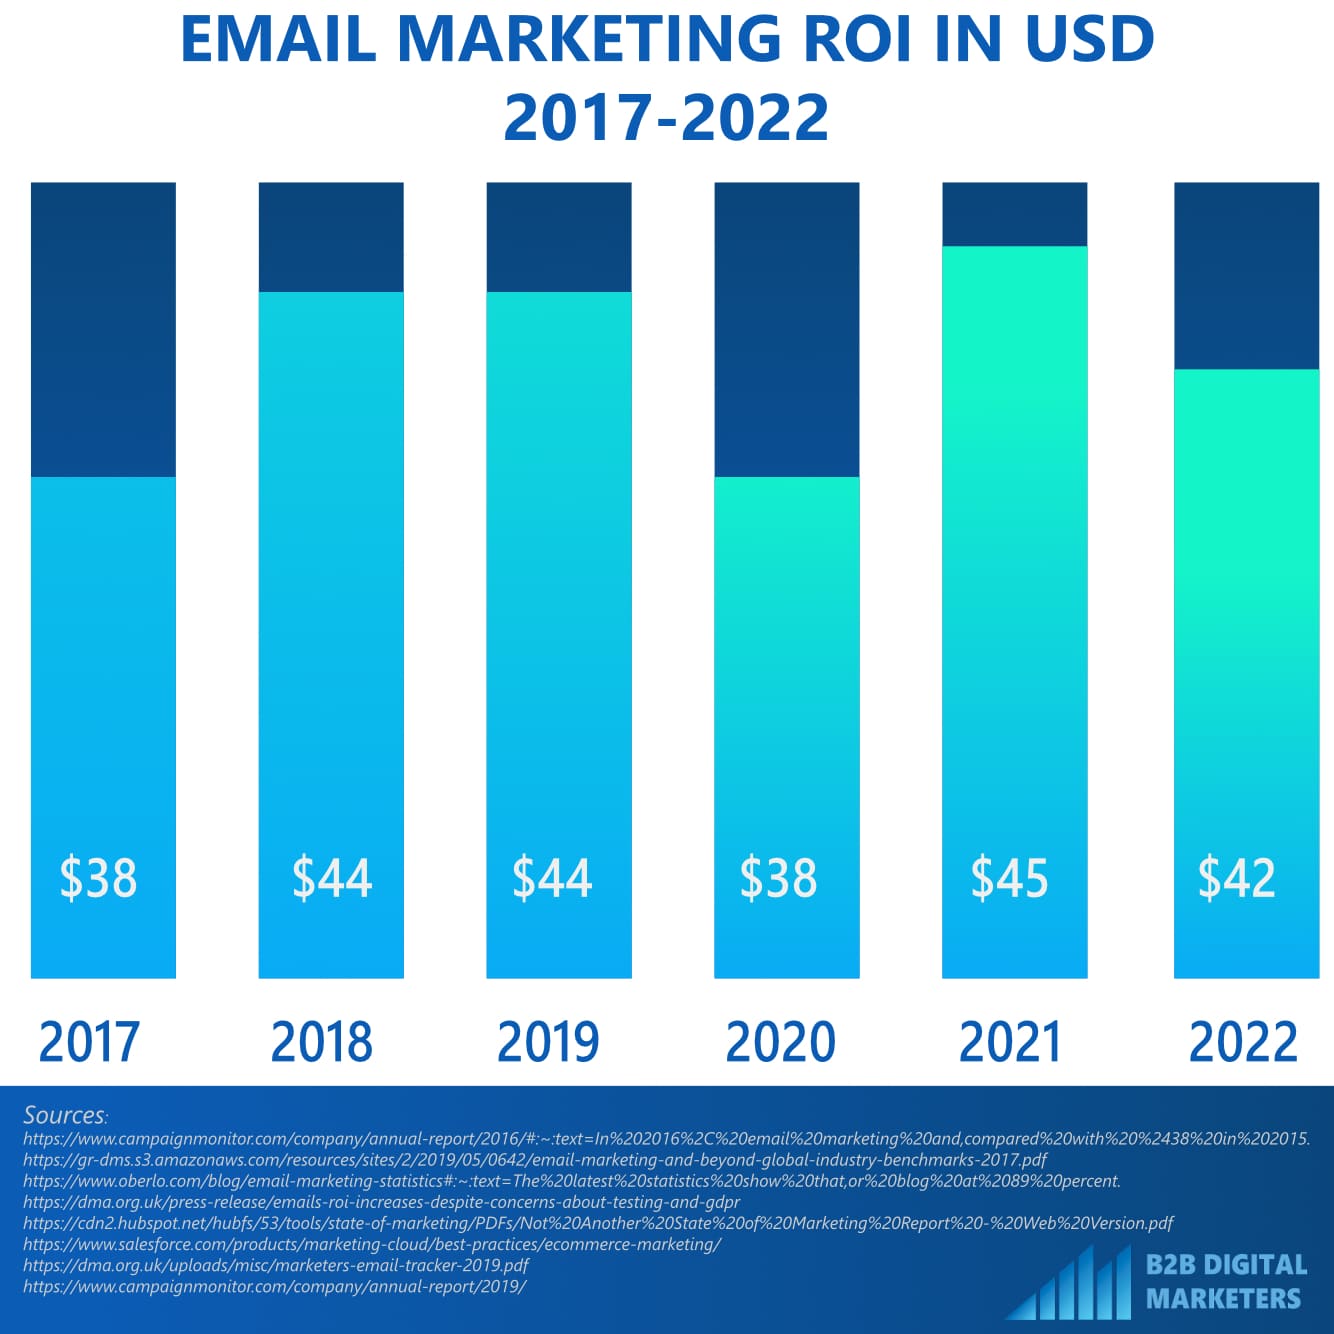 email-marketing-ROI-from-2017-to-2022